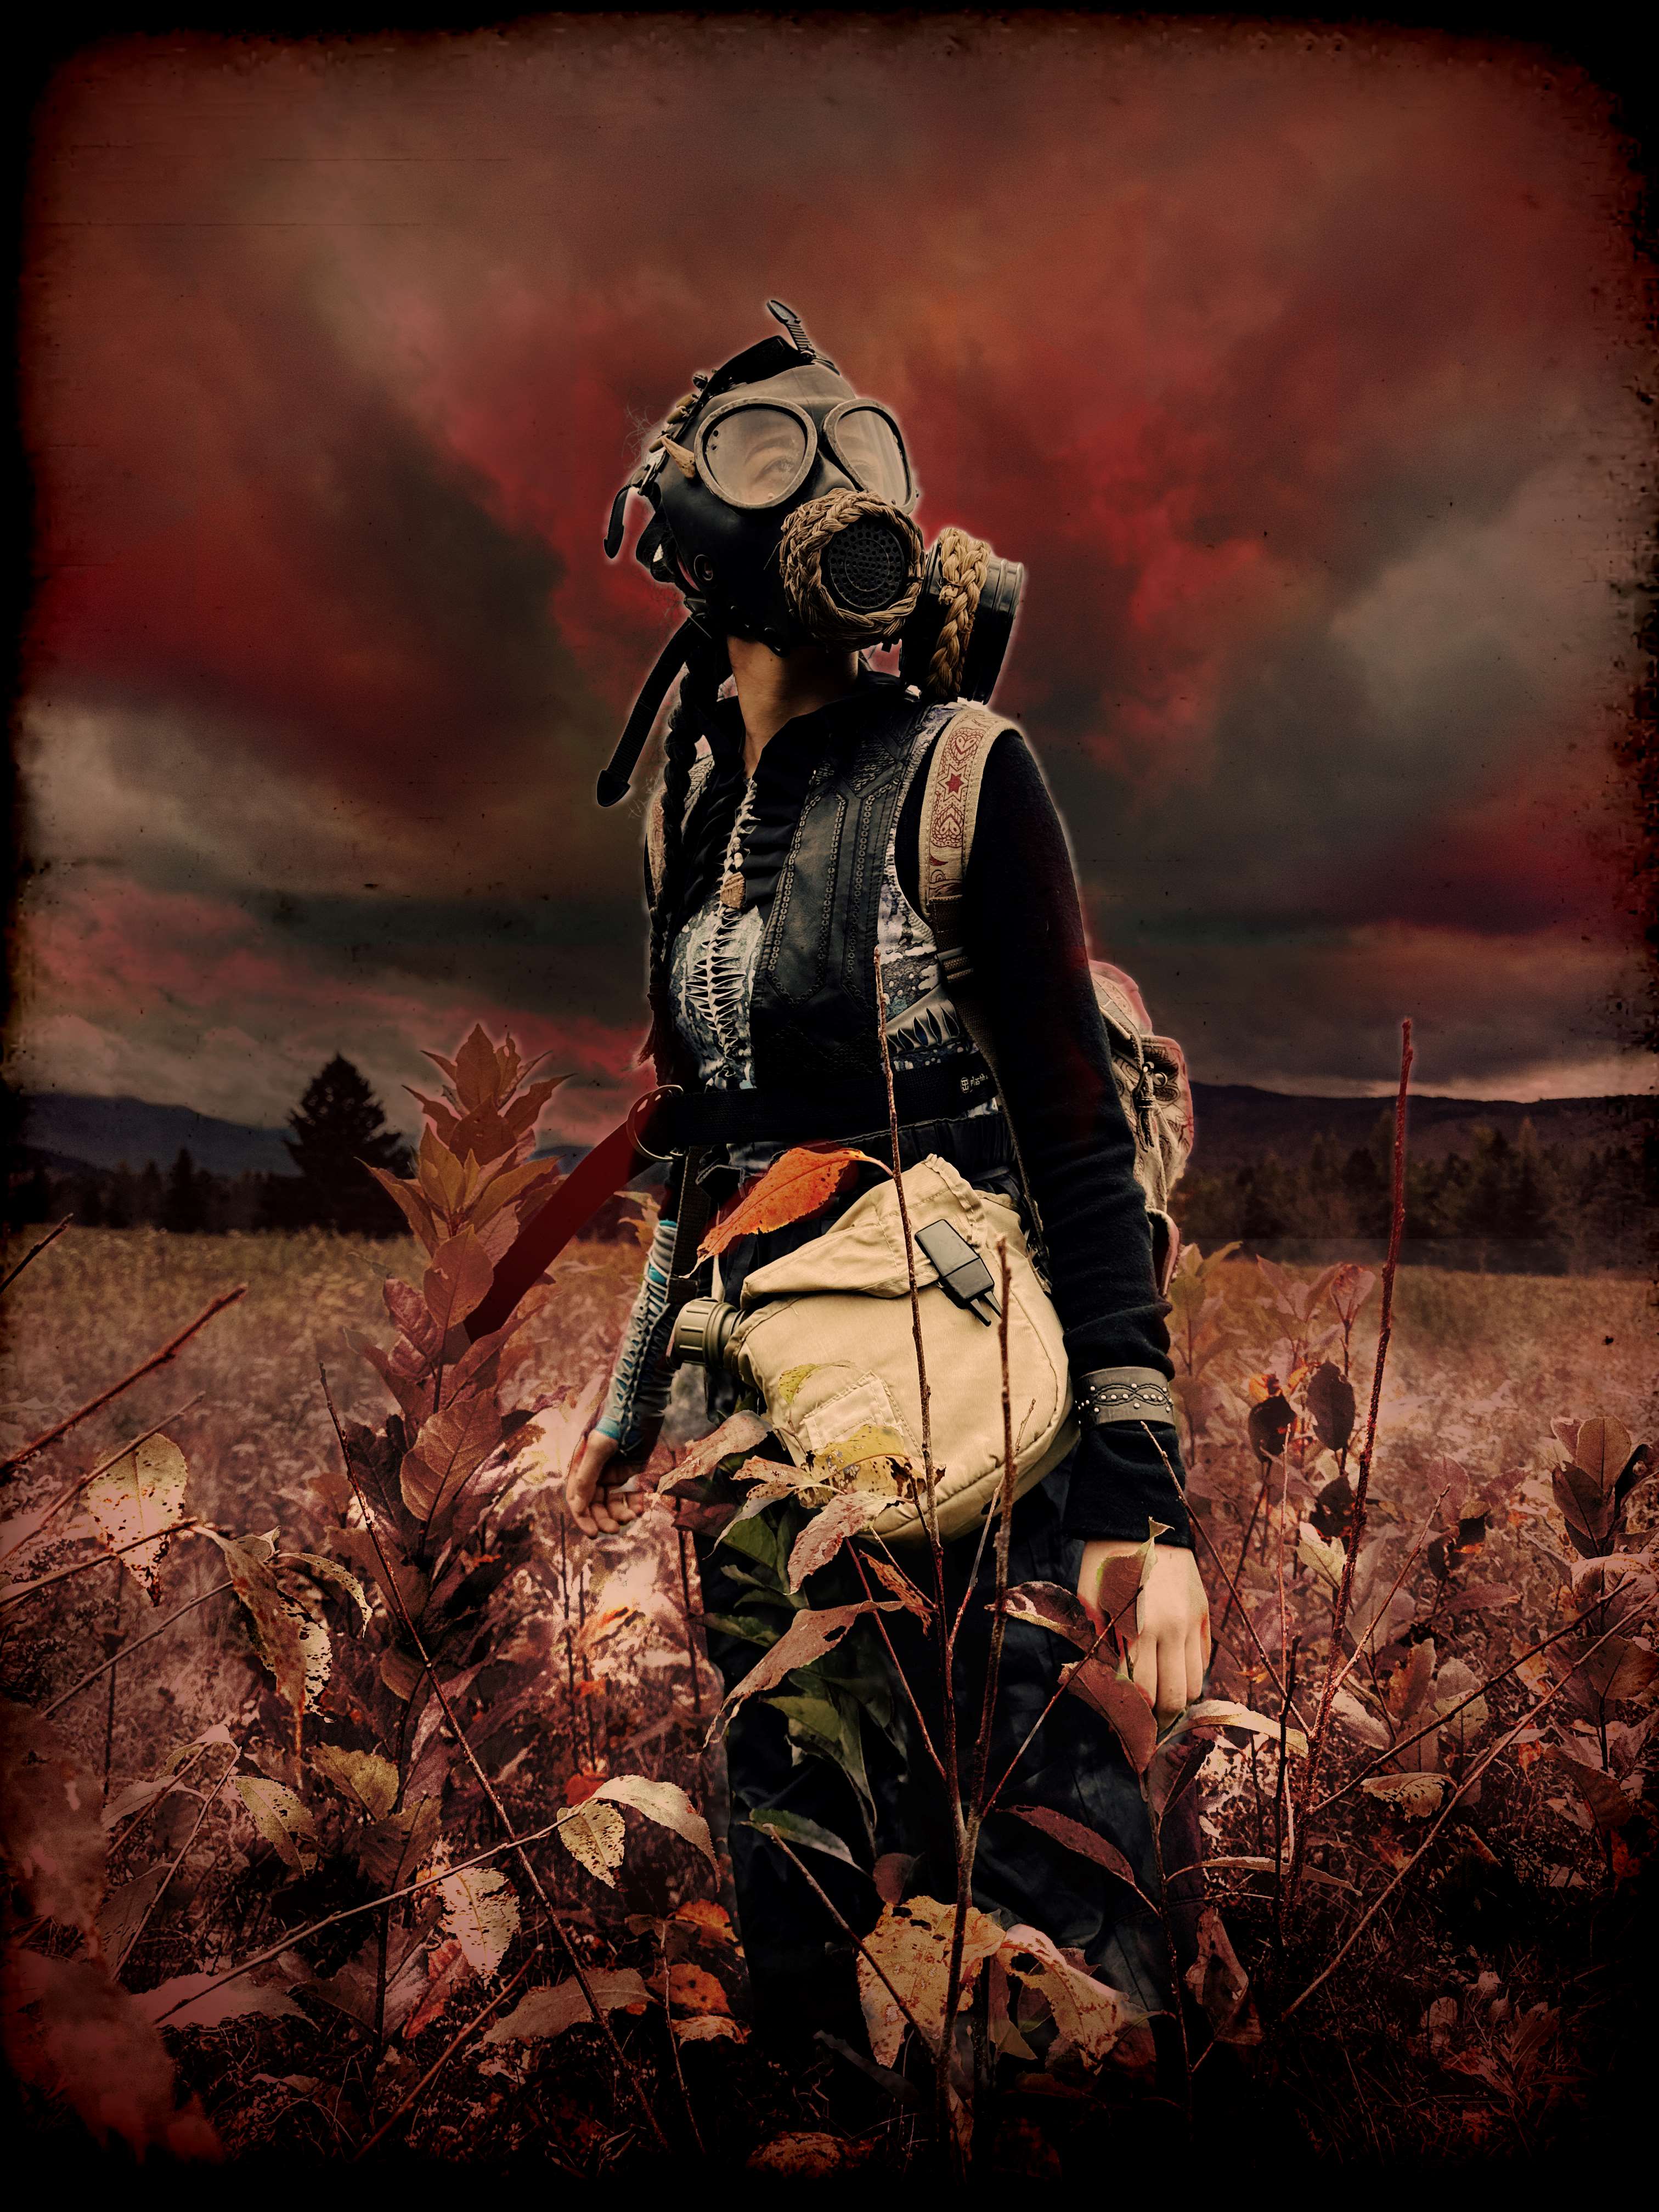 Woman standing in a field with dark, red sky and red tinted landscape. Woman wears gas mask, goggles and carries a large